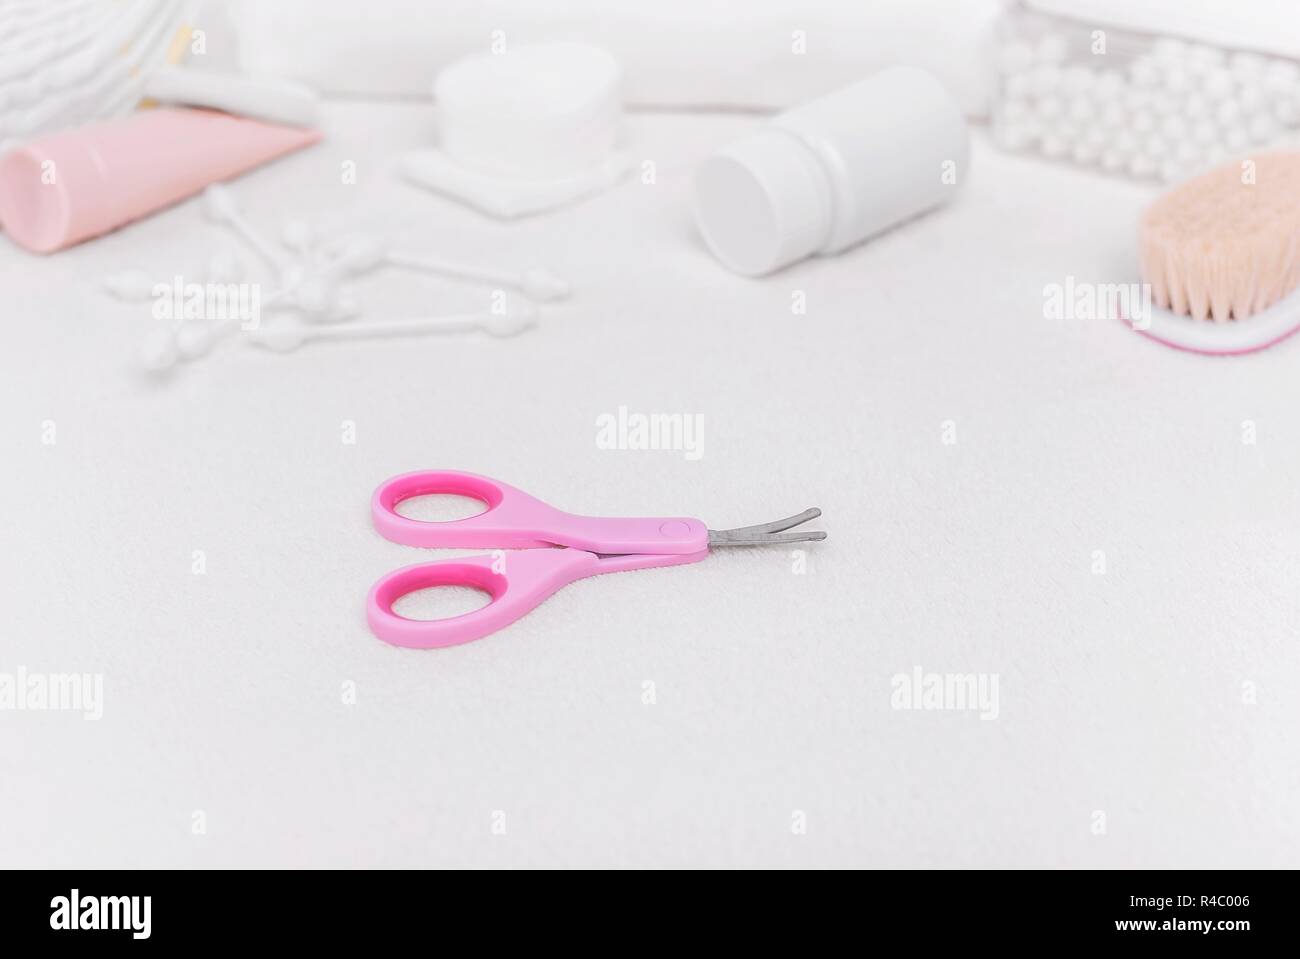 Scissors for newborns with special round tips. Stock Photo